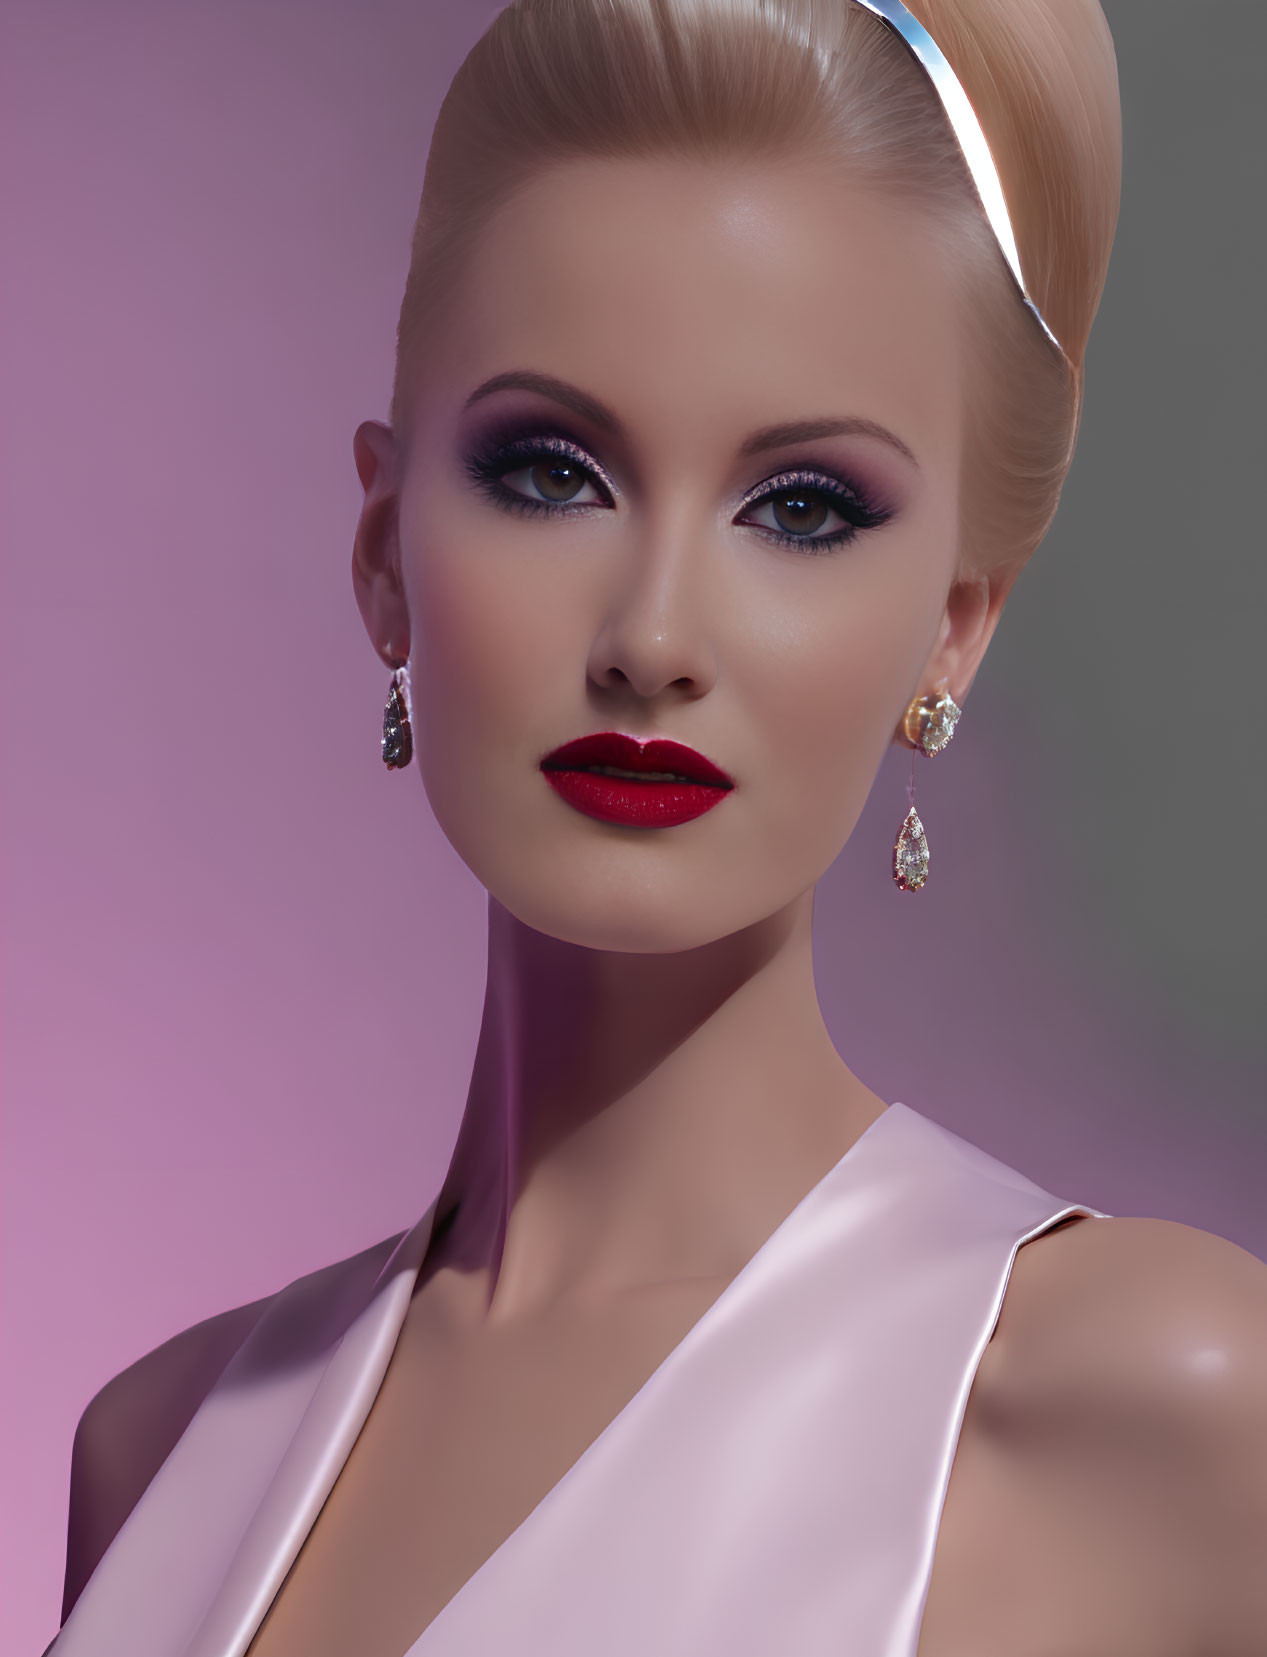 Sleek blonde hair woman portrait with red lipstick and diamond earrings on purple background